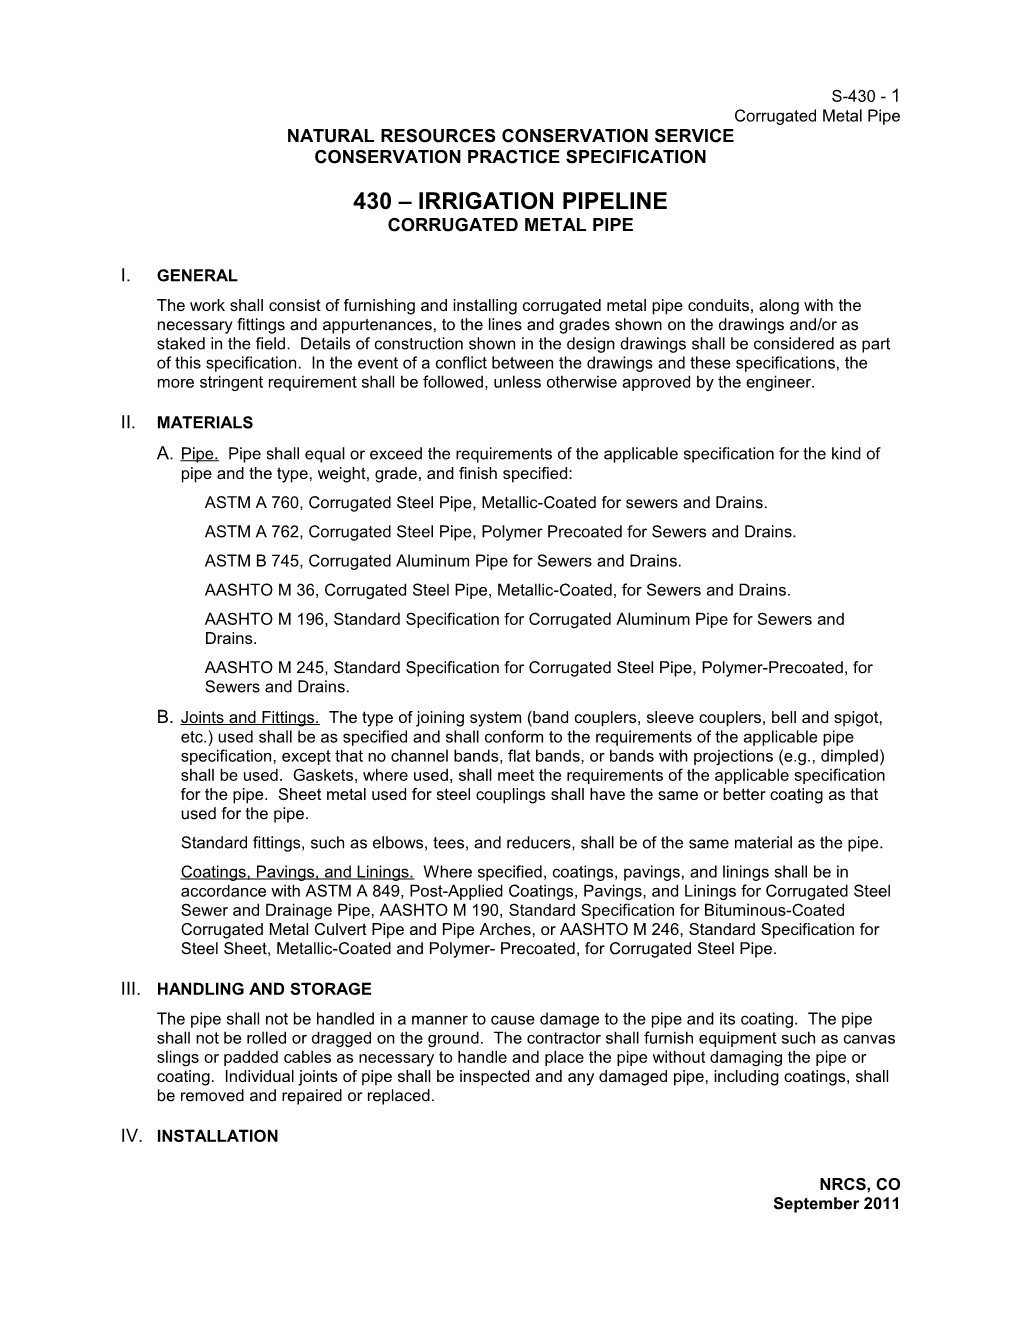 Natural Resources Conservation Service Conservation Practice Specification